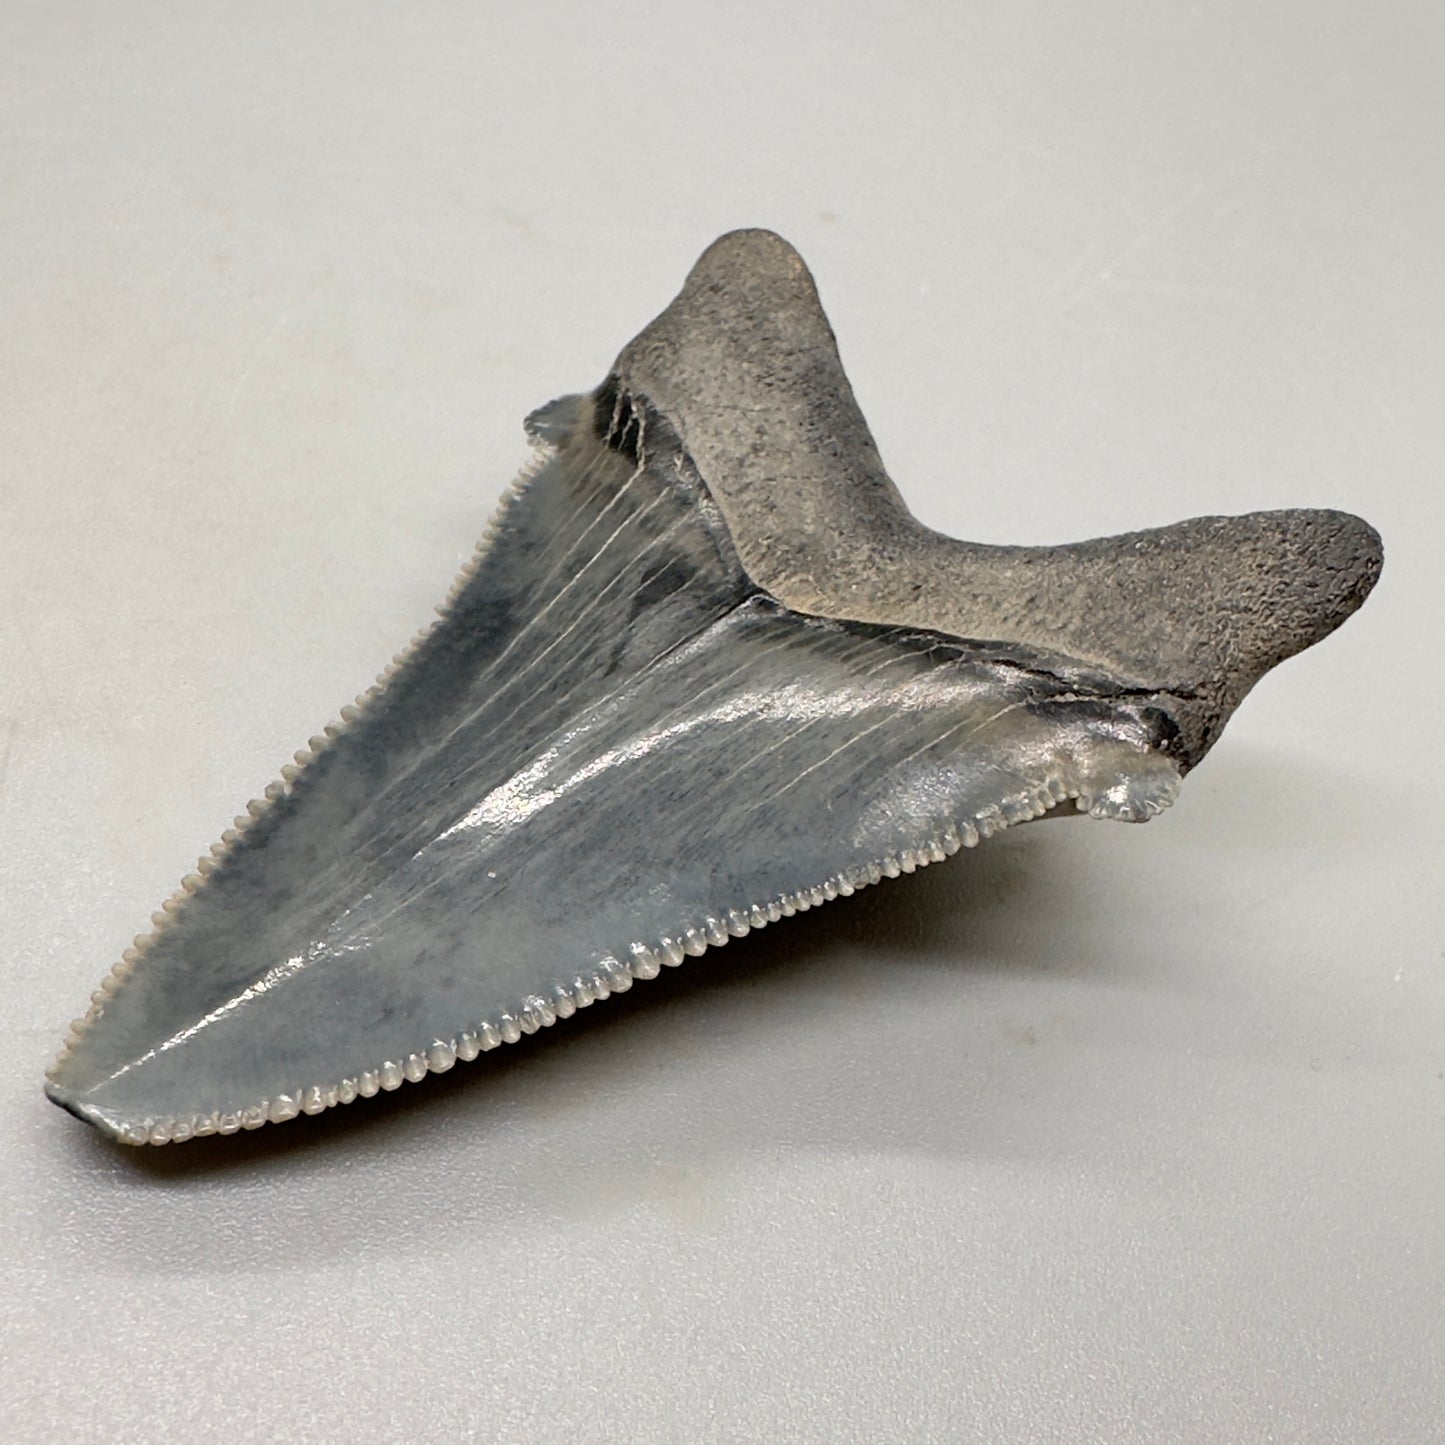 Colorful serrated 2.39 inch Carcharocles angustidens shark tooth from South Carolina AN402 back right